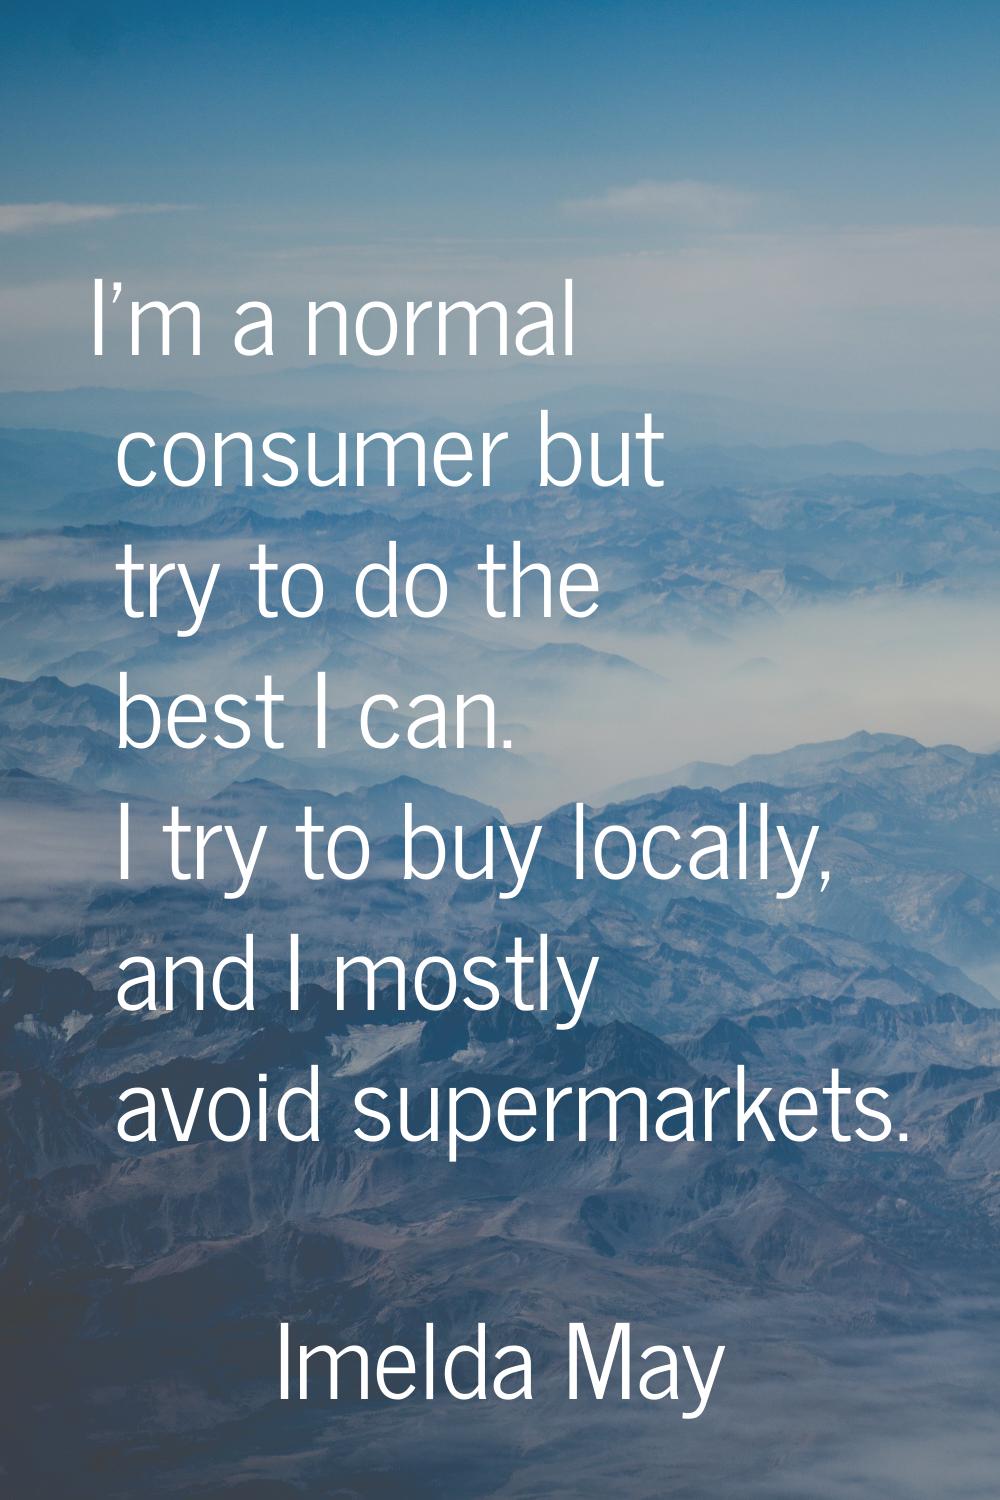 I'm a normal consumer but try to do the best I can. I try to buy locally, and I mostly avoid superm